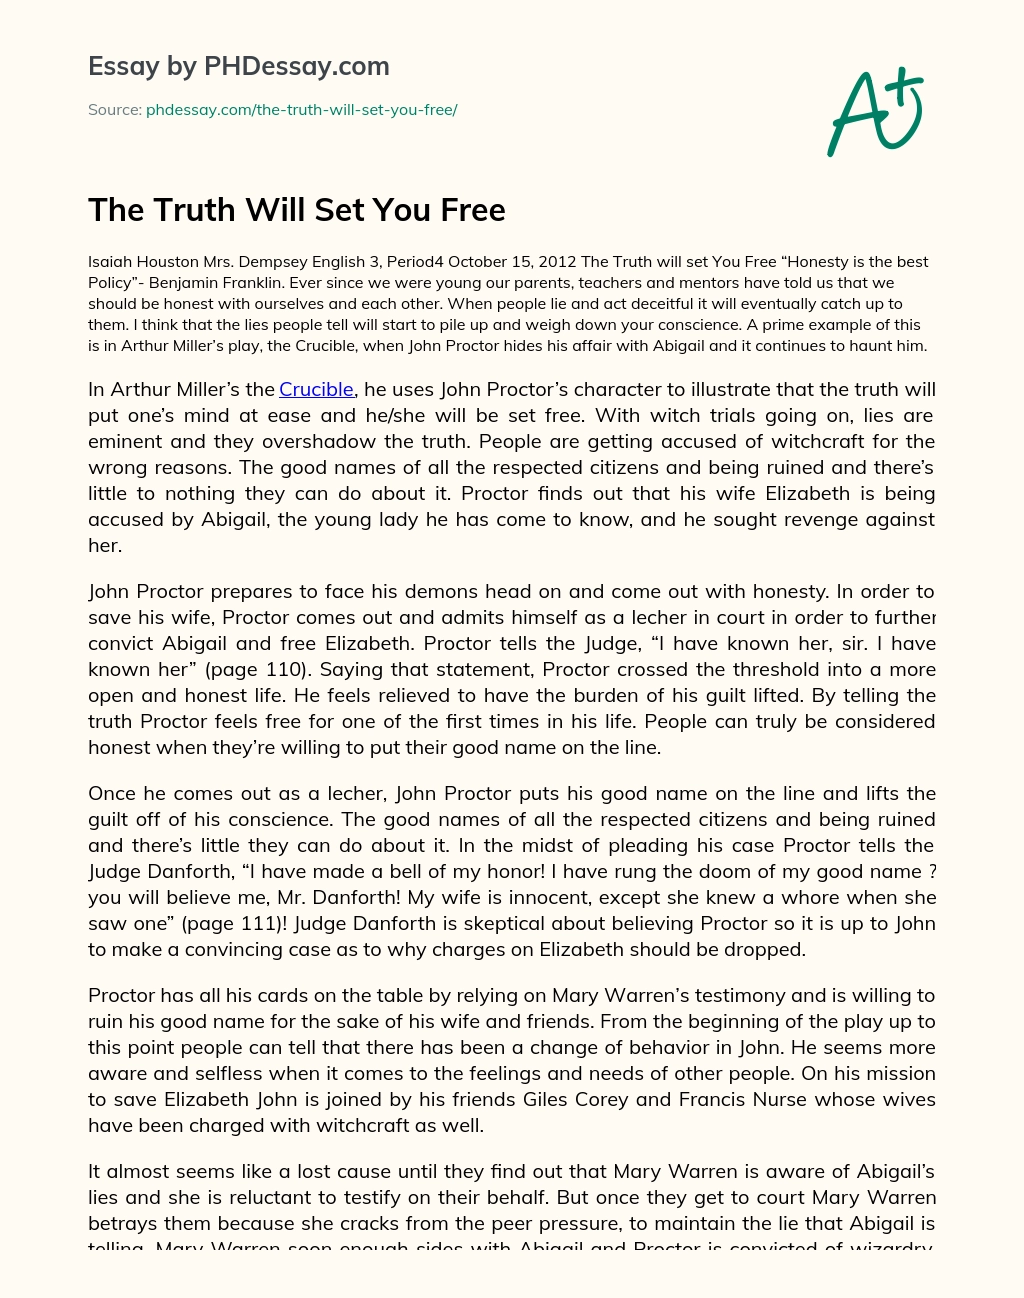 the truth will set you free essay brainly